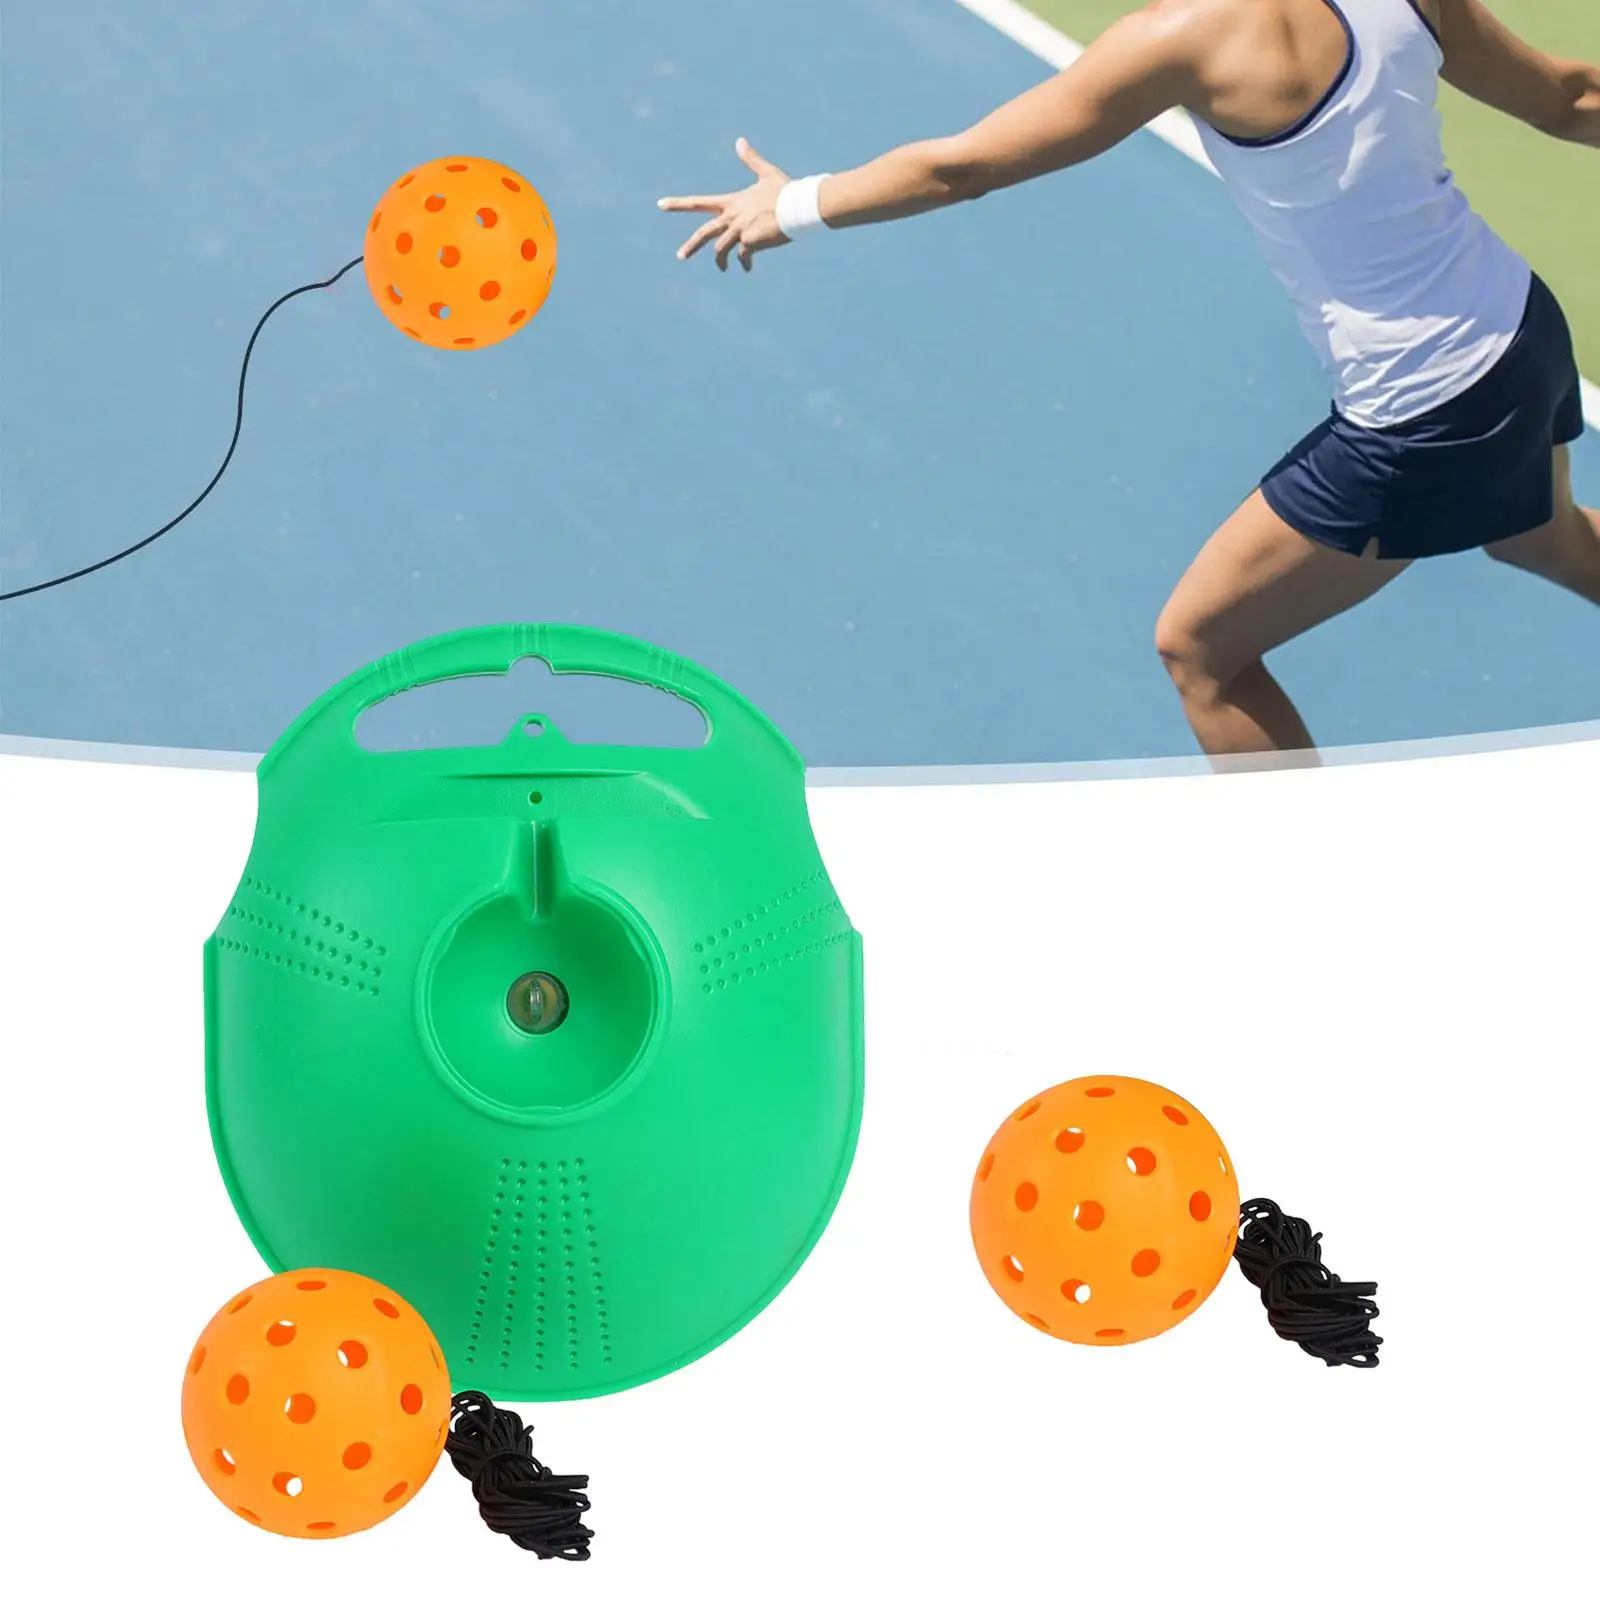 Pickleball Trainer with 40 Holes Pickleball Ball Portable with Handle Convenient Pickleball Accessories for Exercise Training